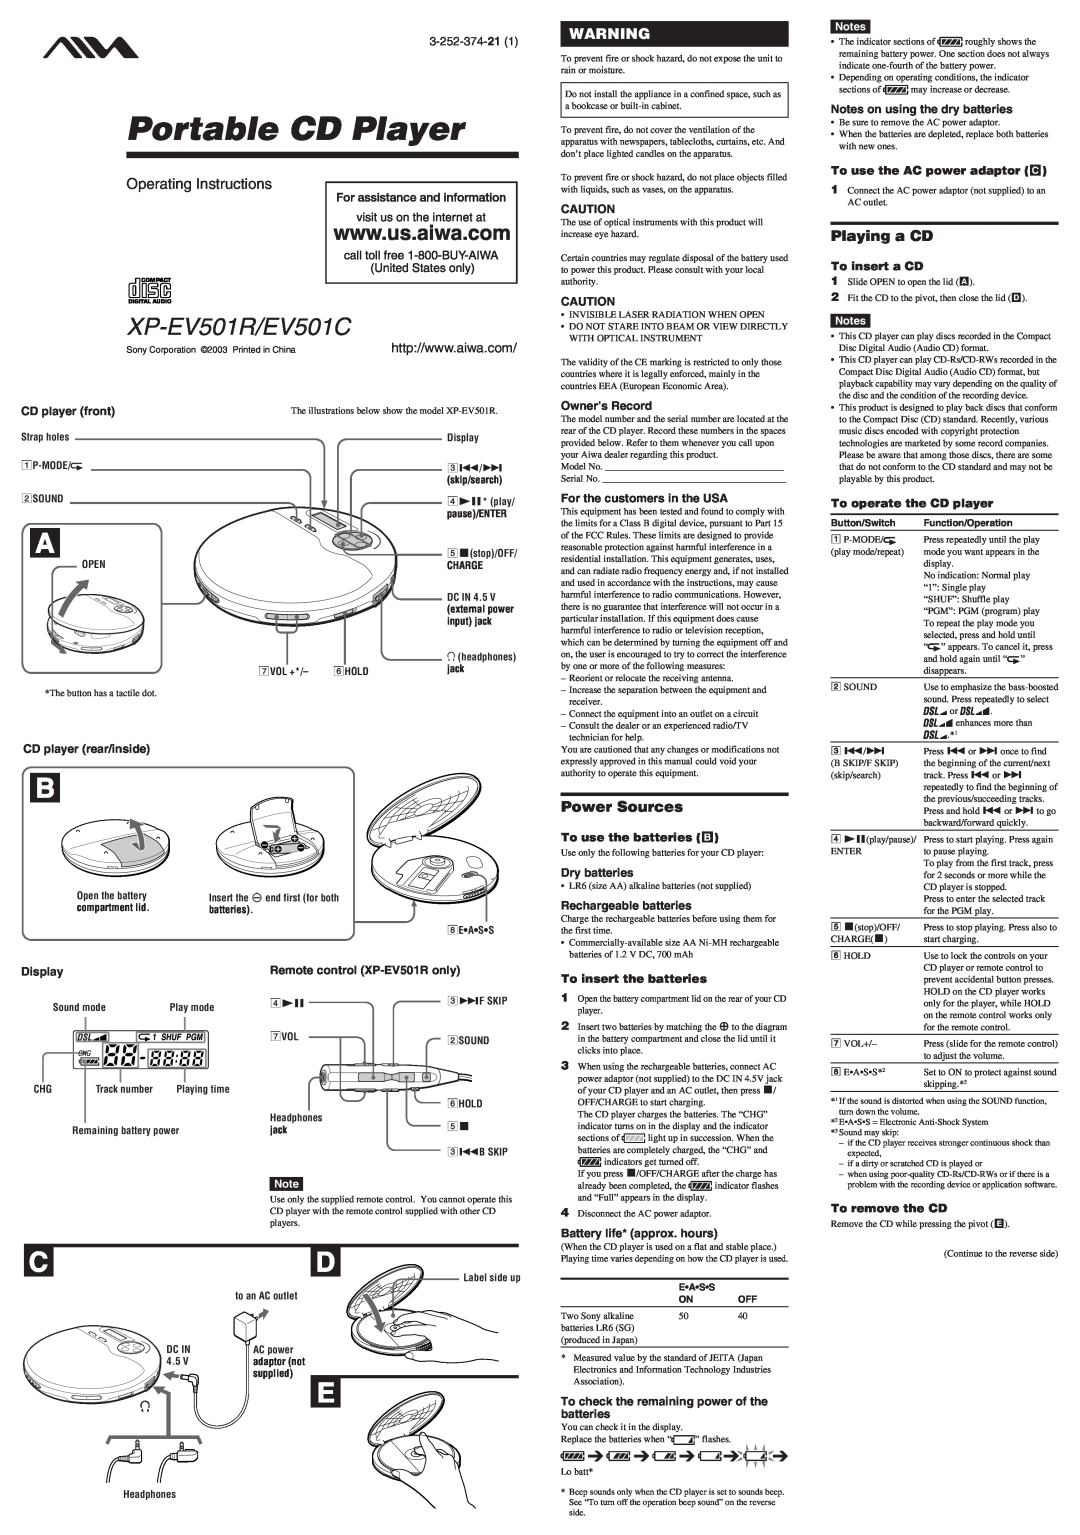 Aiwa operating instructions Playing a CD, Power Sources, Portable CD Player, XP-EV501R/EV501C, Operating Instructions 